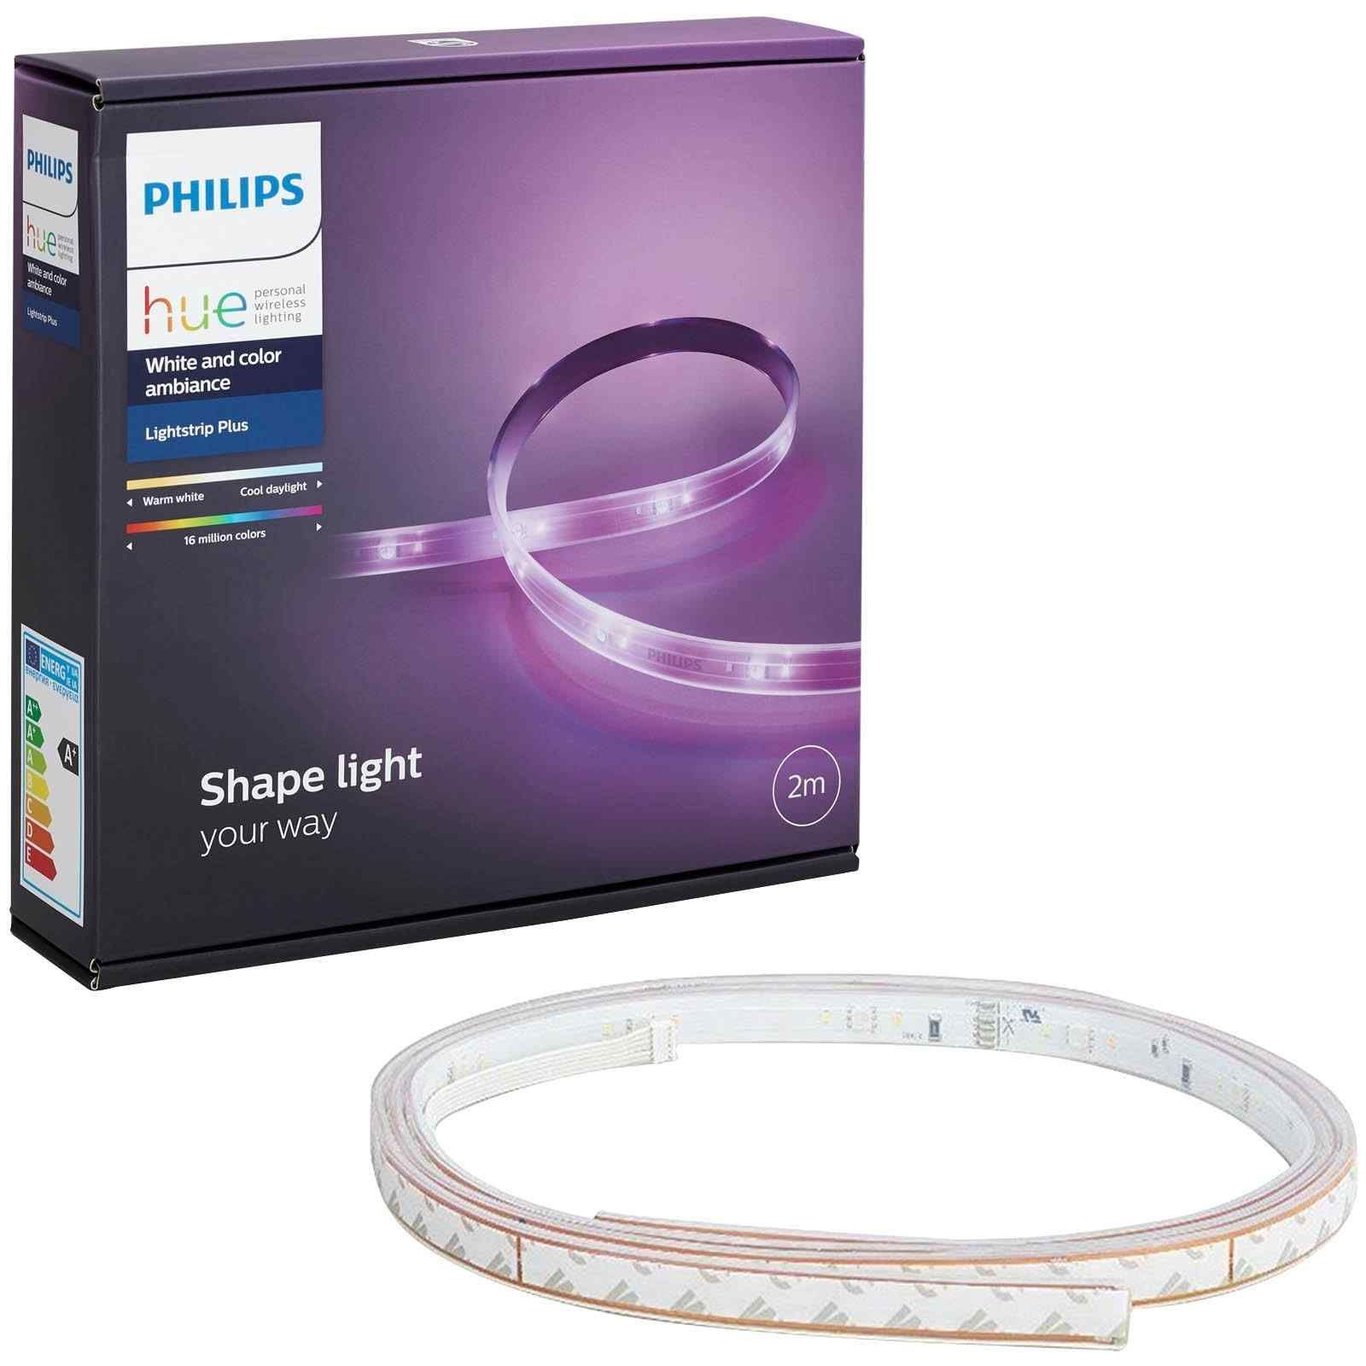 Philips Hue White 及 Color Ambiance LightStrip Plus APR 基本版 2米